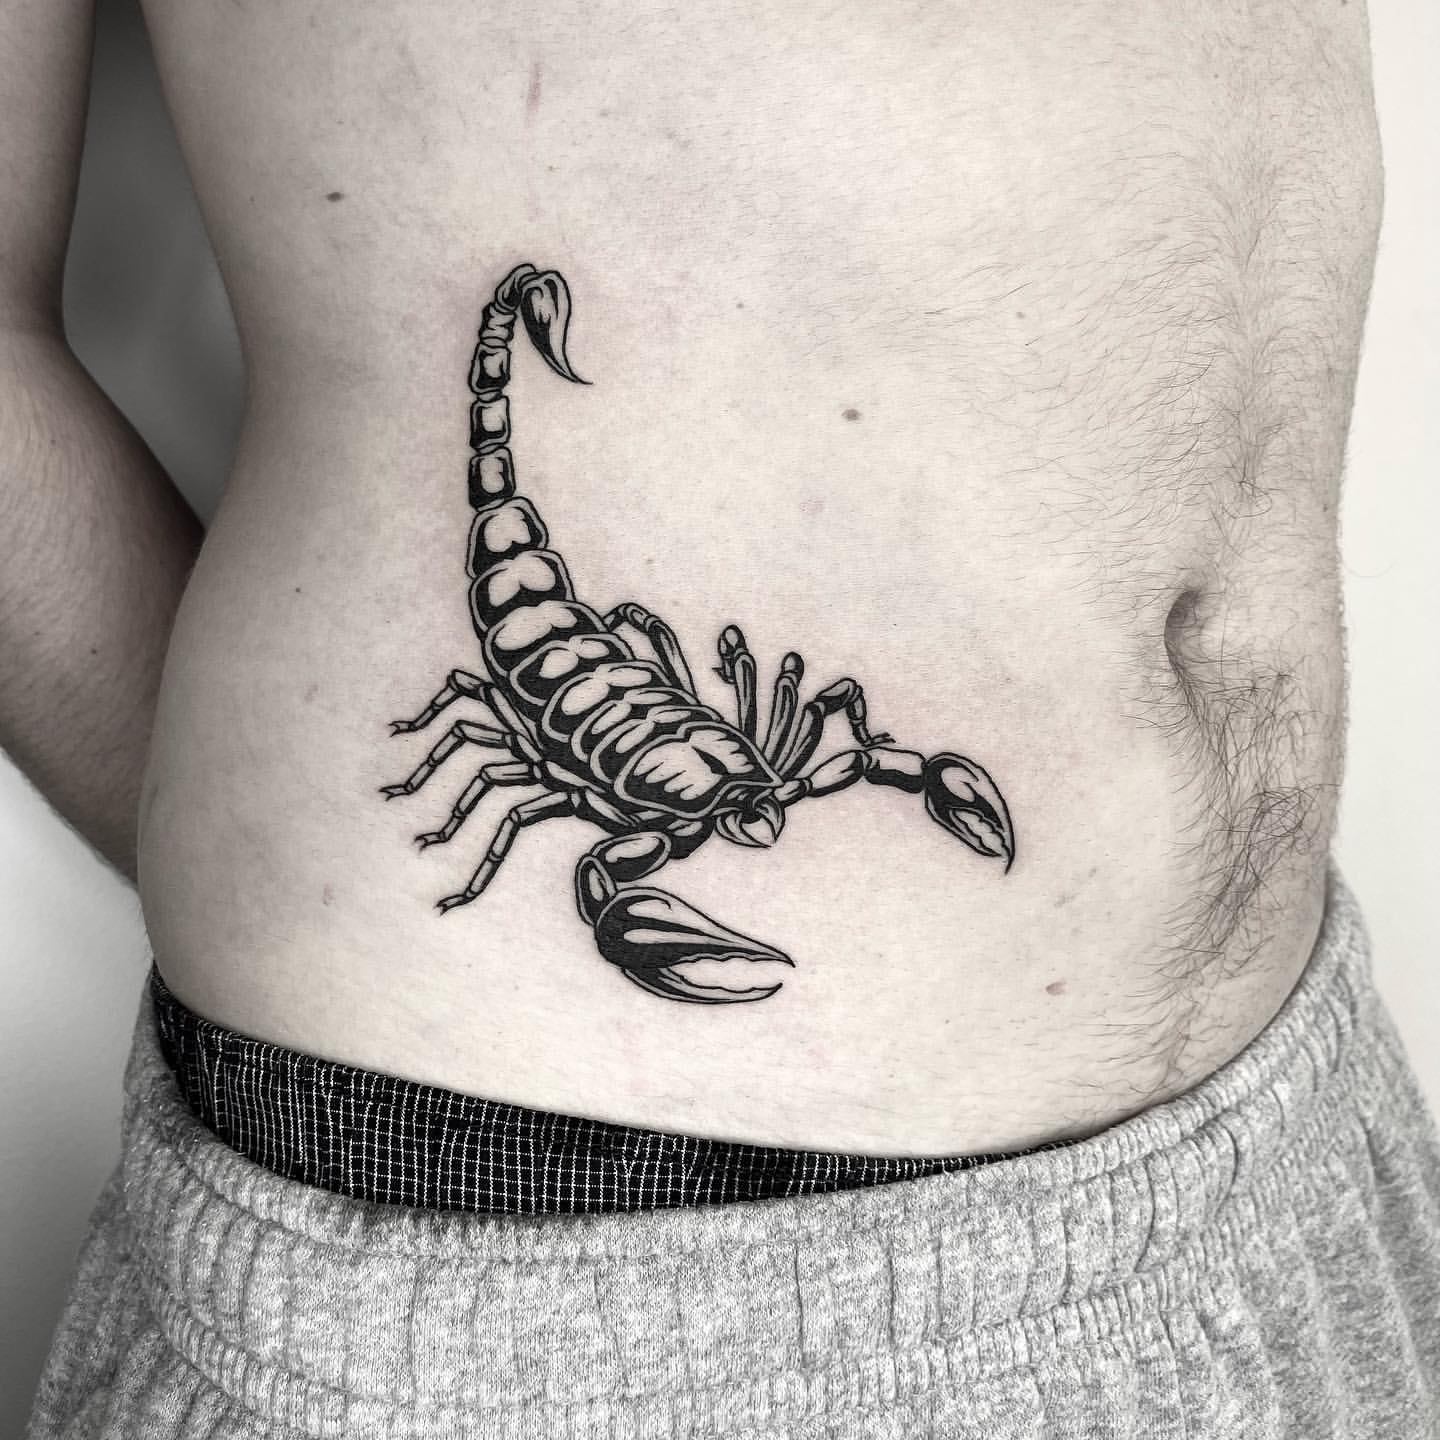 Stomach Scorpion tattoo men at theYou.com